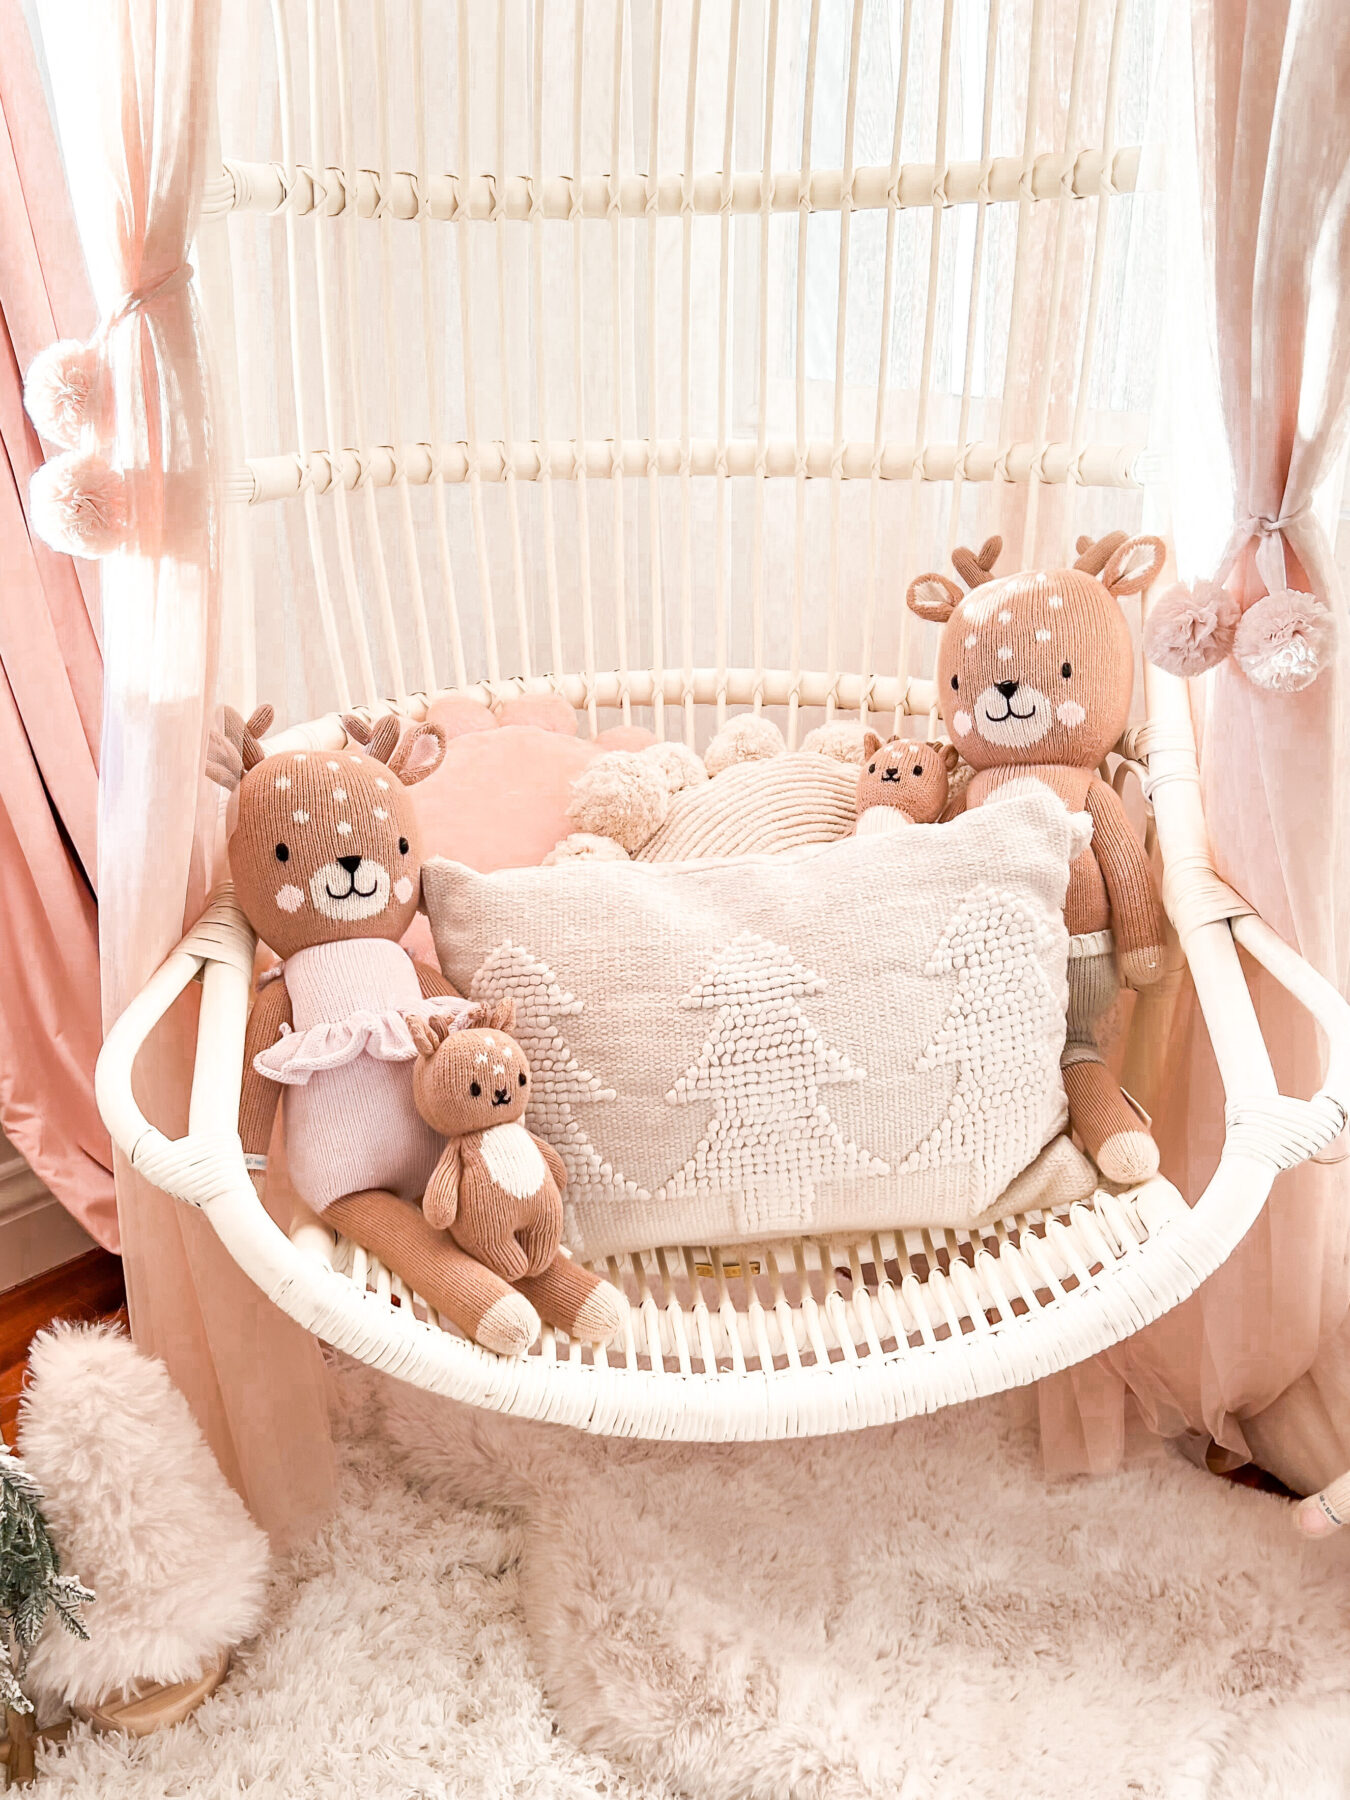 Pink Christmas Decor  little girl Christmas bedroom Katelyn Jones A Touch of Pink Blog Pink Christmas Decor Hanging Rattan Chair Cuddle and Kind Reindeer Dolls